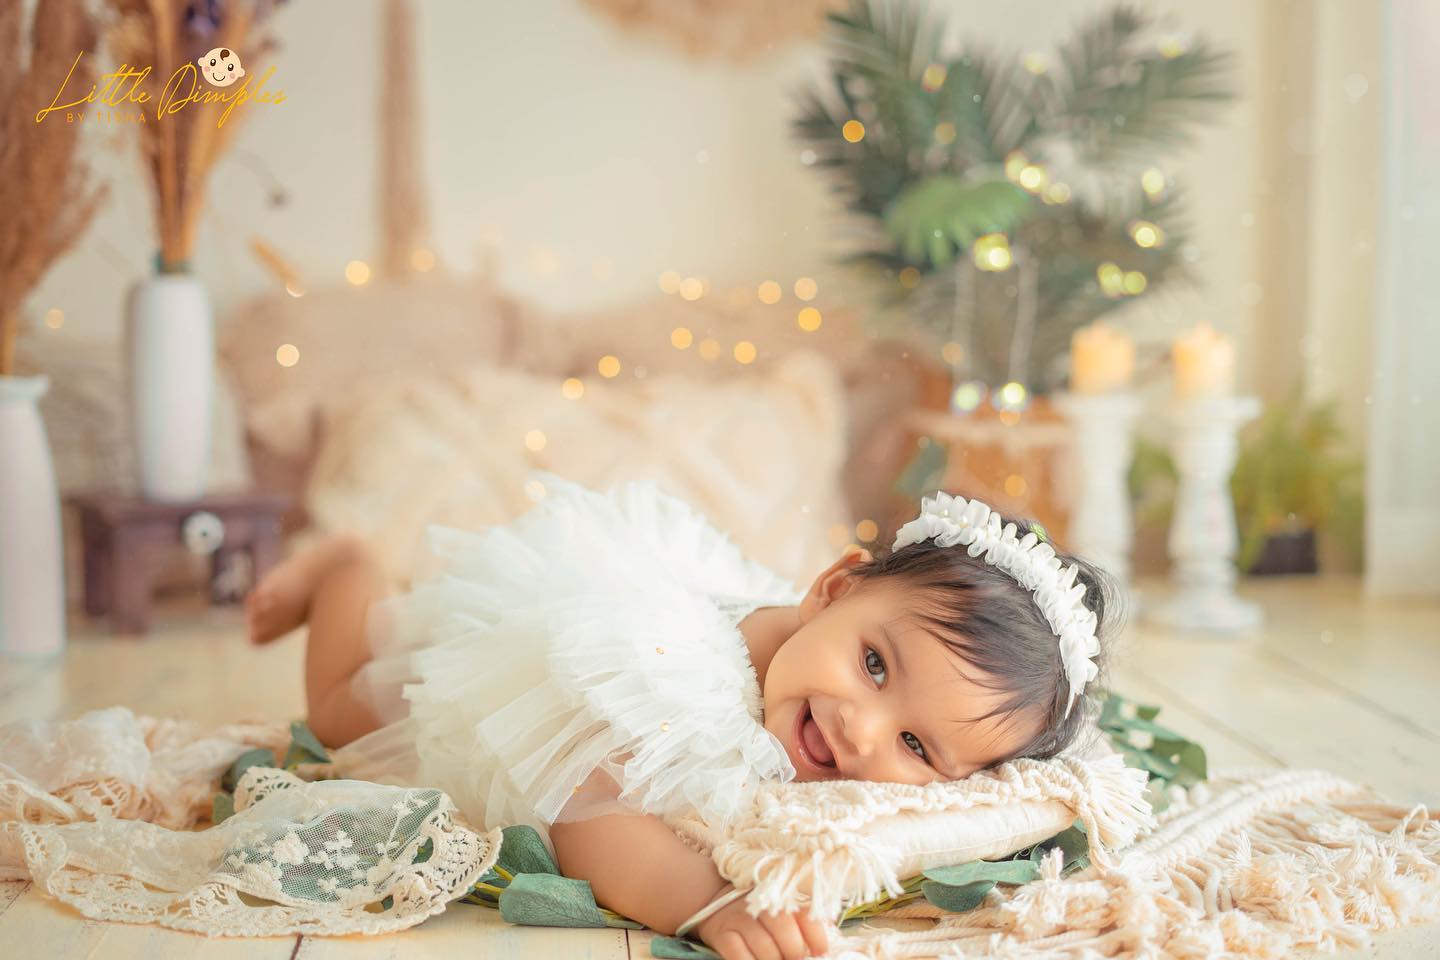 We specialize in elegant newborn photography and baby photography. If you are looking for baby photography or newborn photoshoot in Bangalore, contact us now!